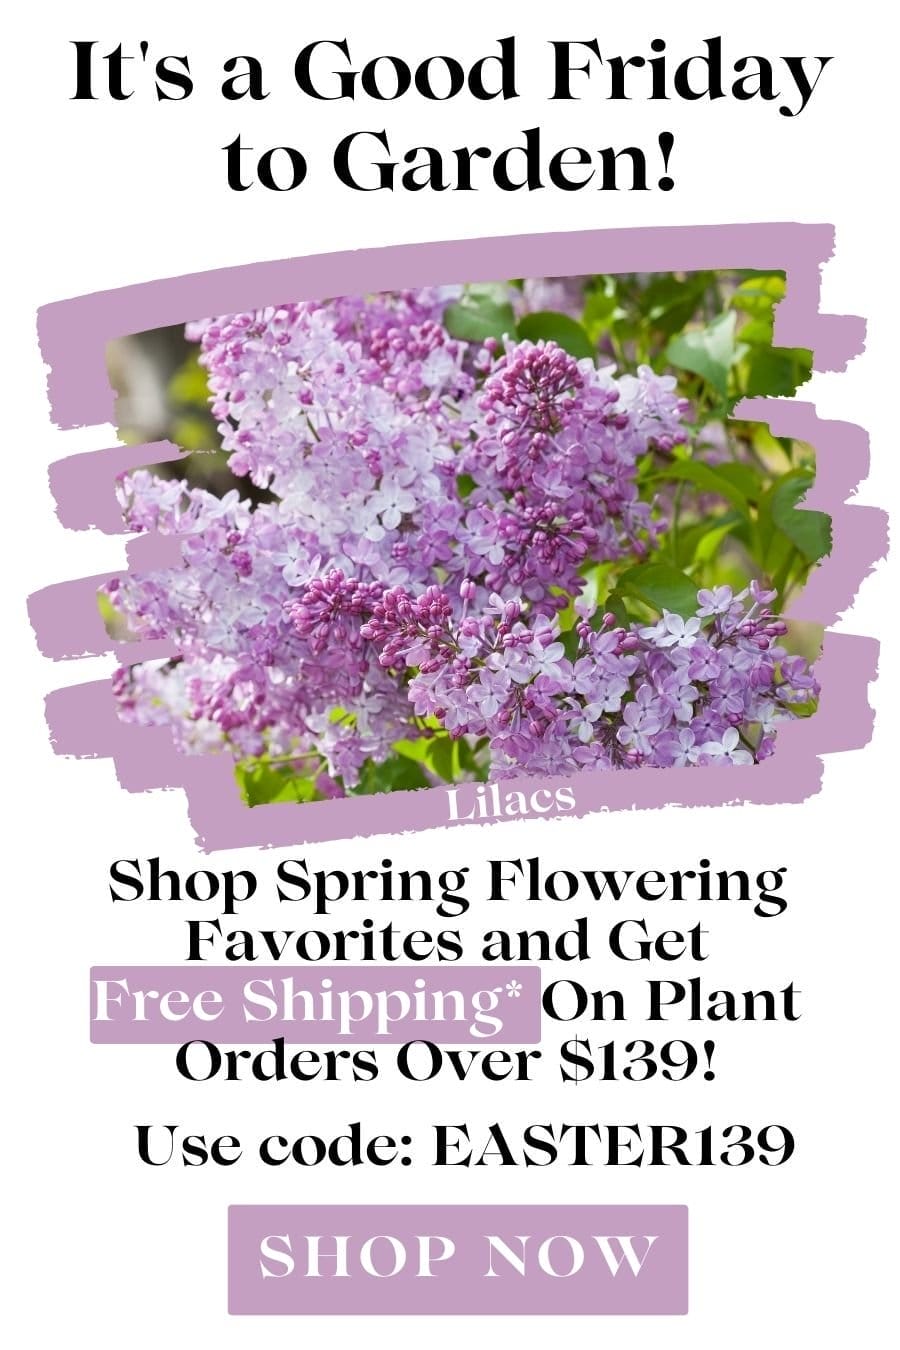 It’s a Good Friday to Plant! Free Shipping on Plant Orders over \\$139.